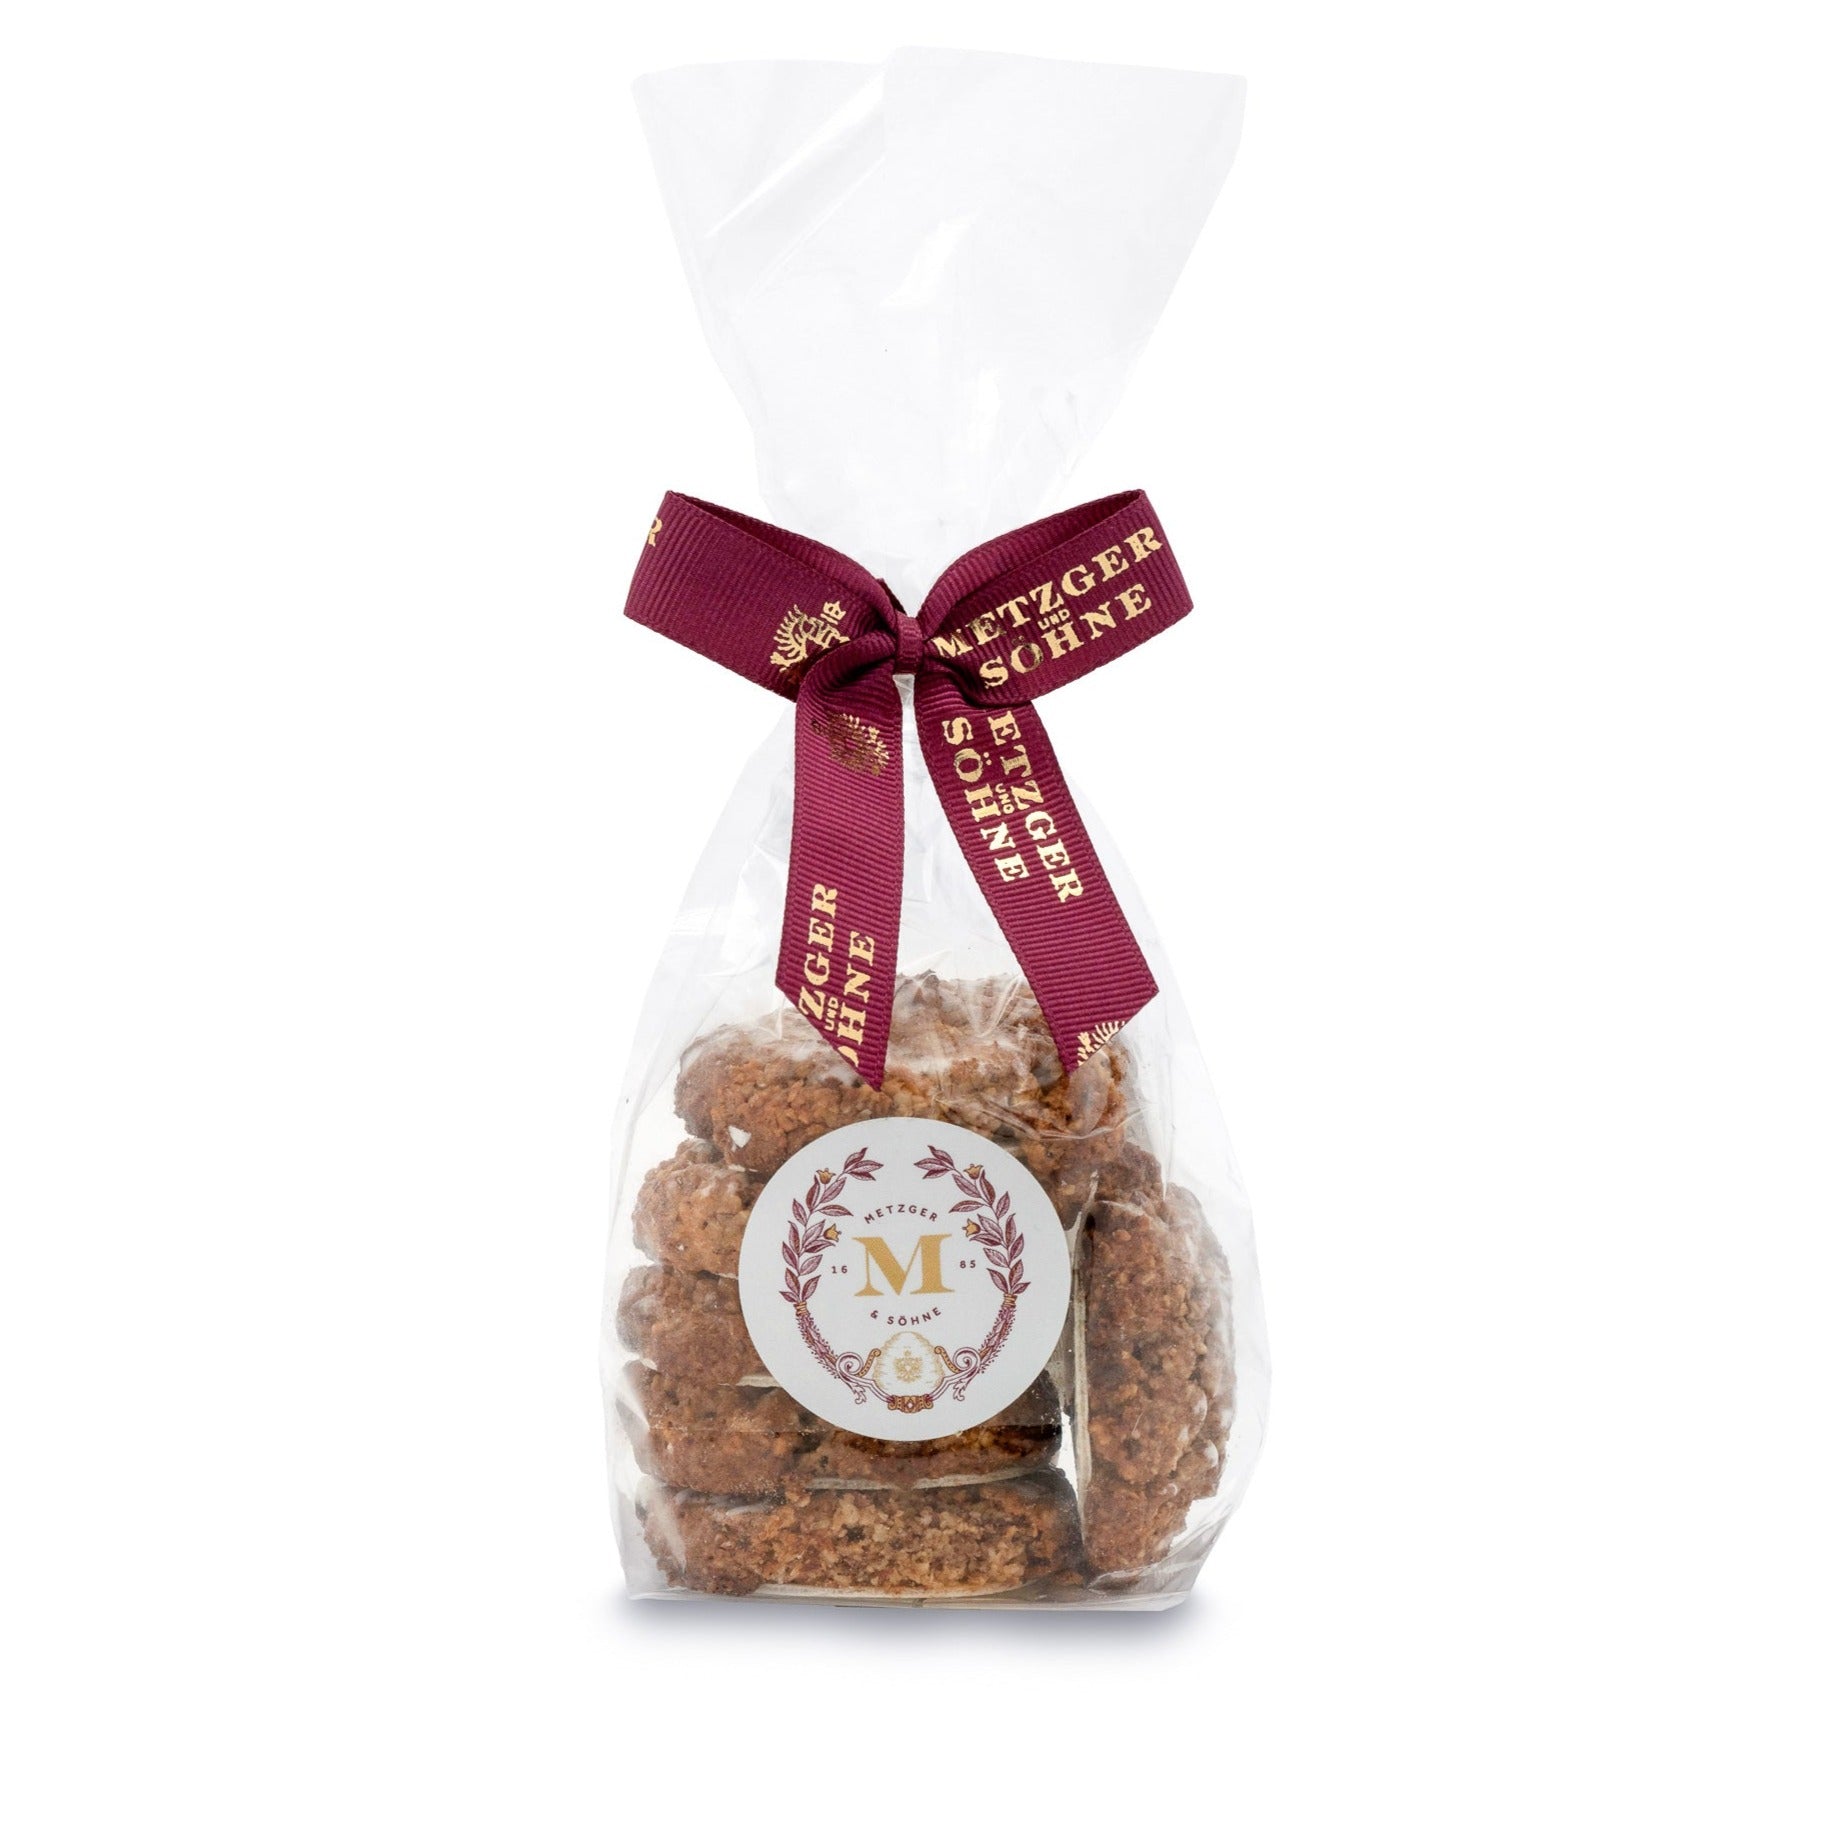 Small Elisen-Lebkuchen made from almonds and hazelnuts completely WITHOUT FLOUR on a wafer.